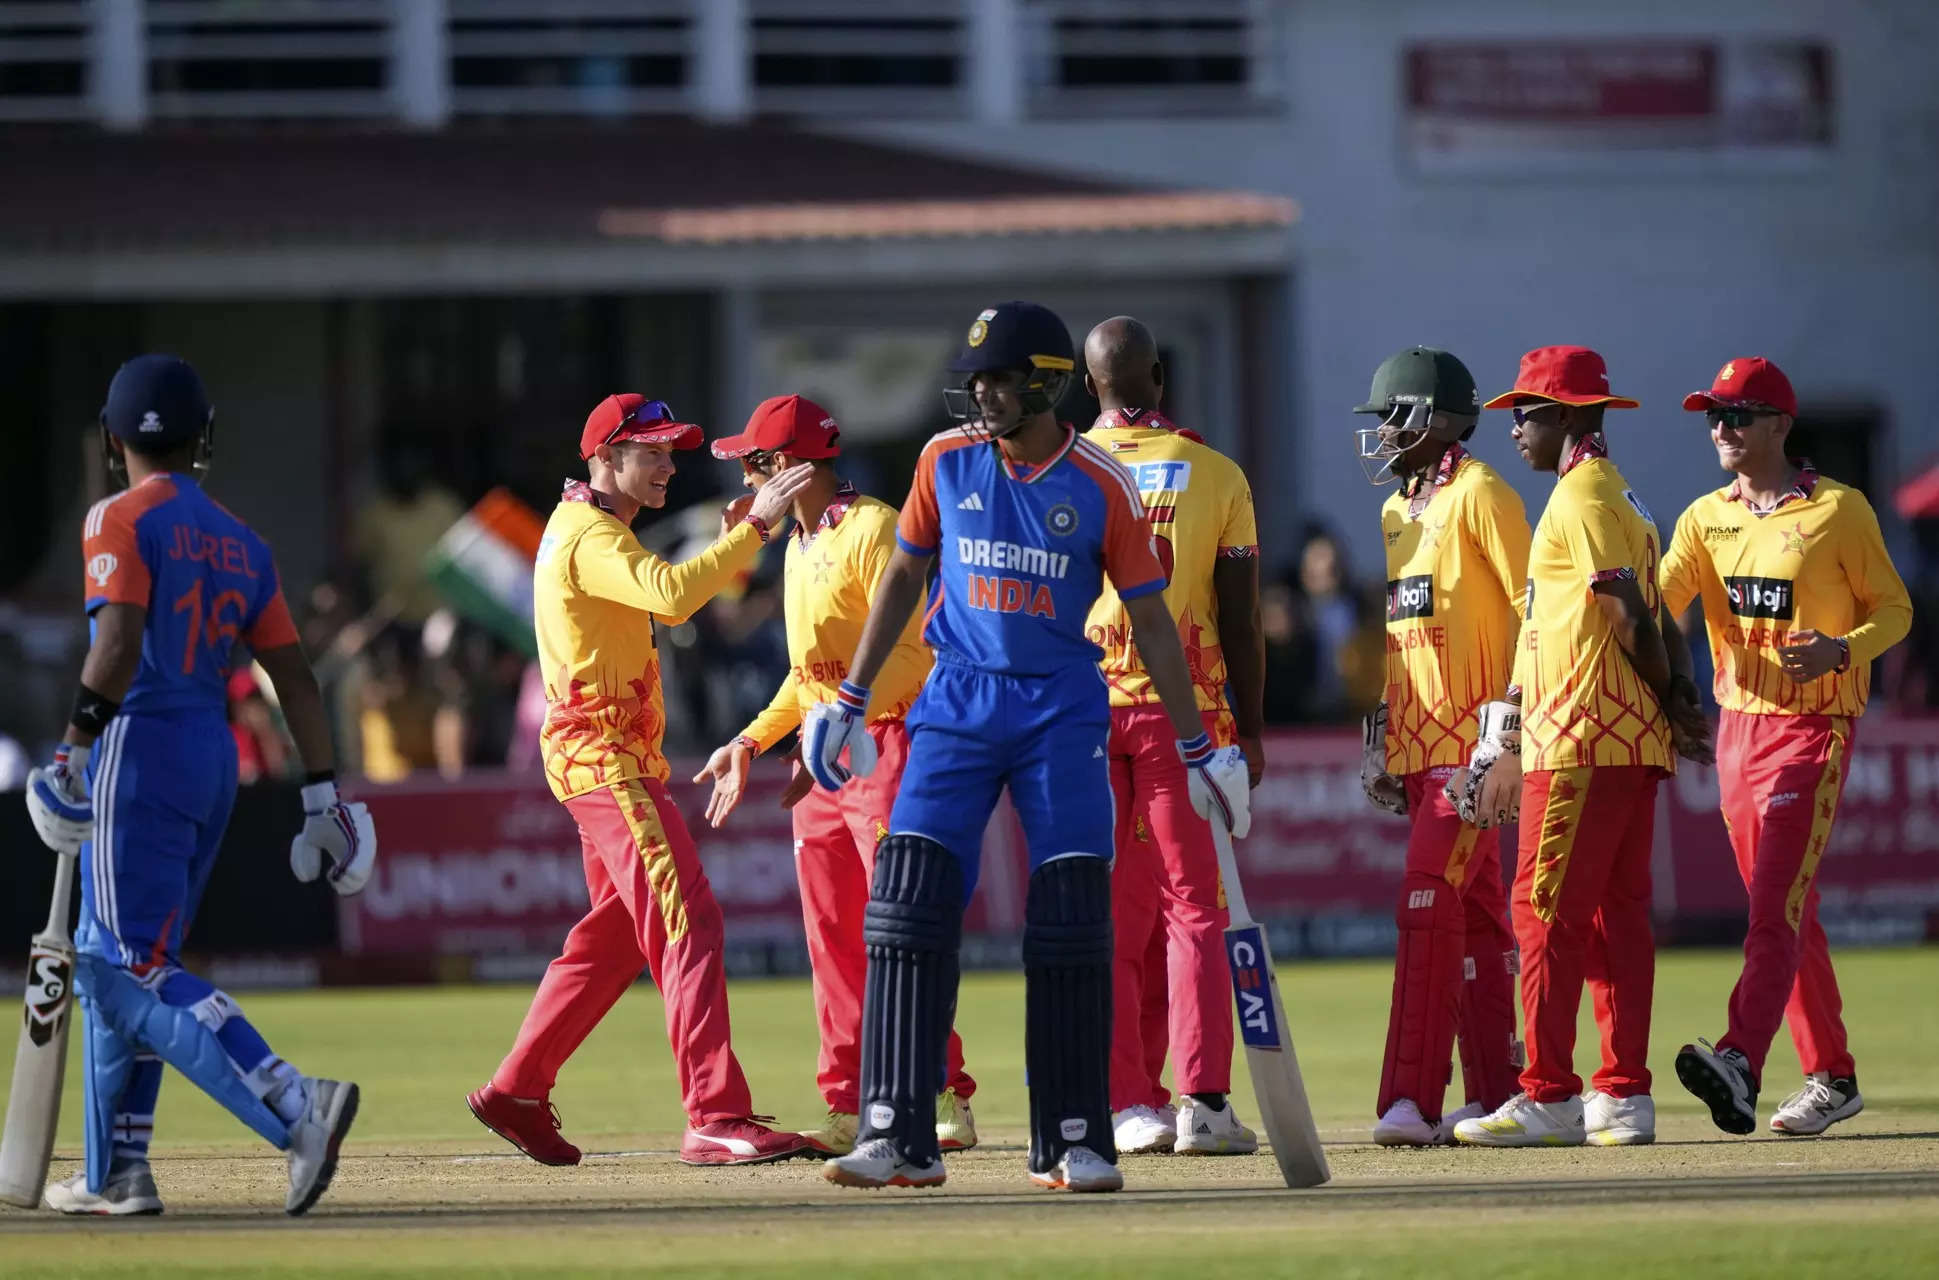 India vs Zimbabwe 2nd T20: Harare pitch report, weather update, Dream 11 predictions - all you need to know 